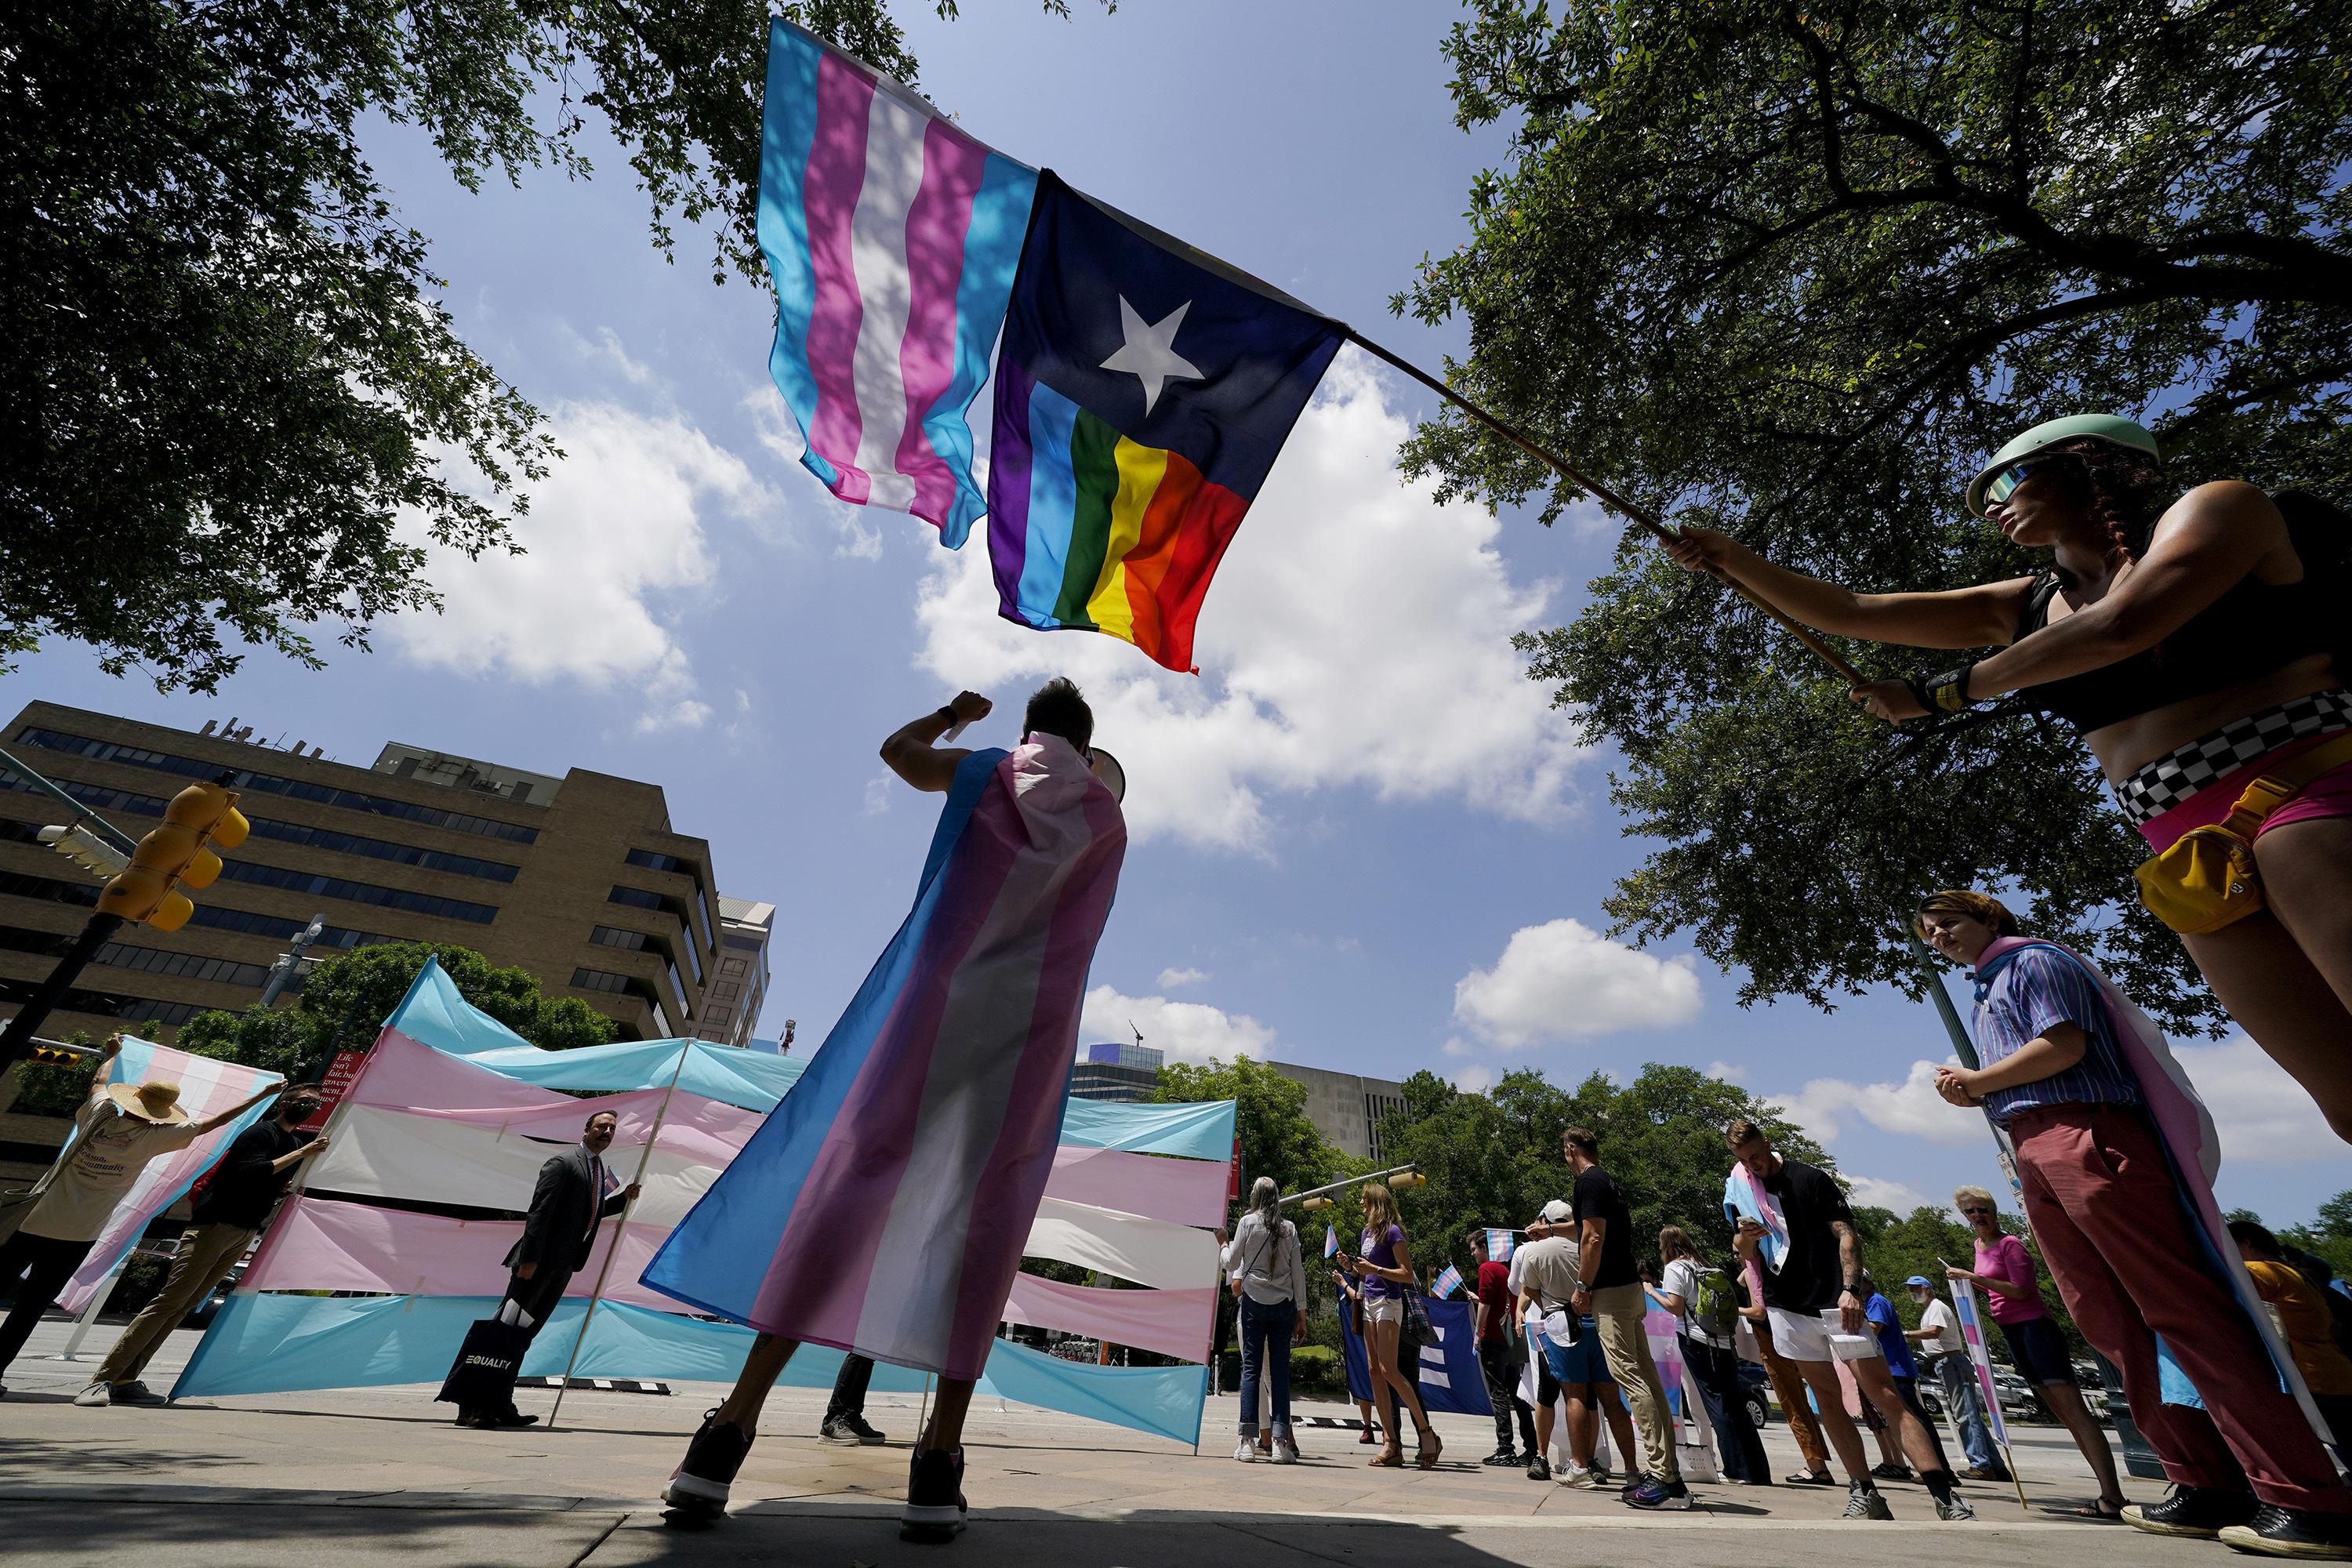 Judge blocks Texas investigating families of trans youth – The Associated Press